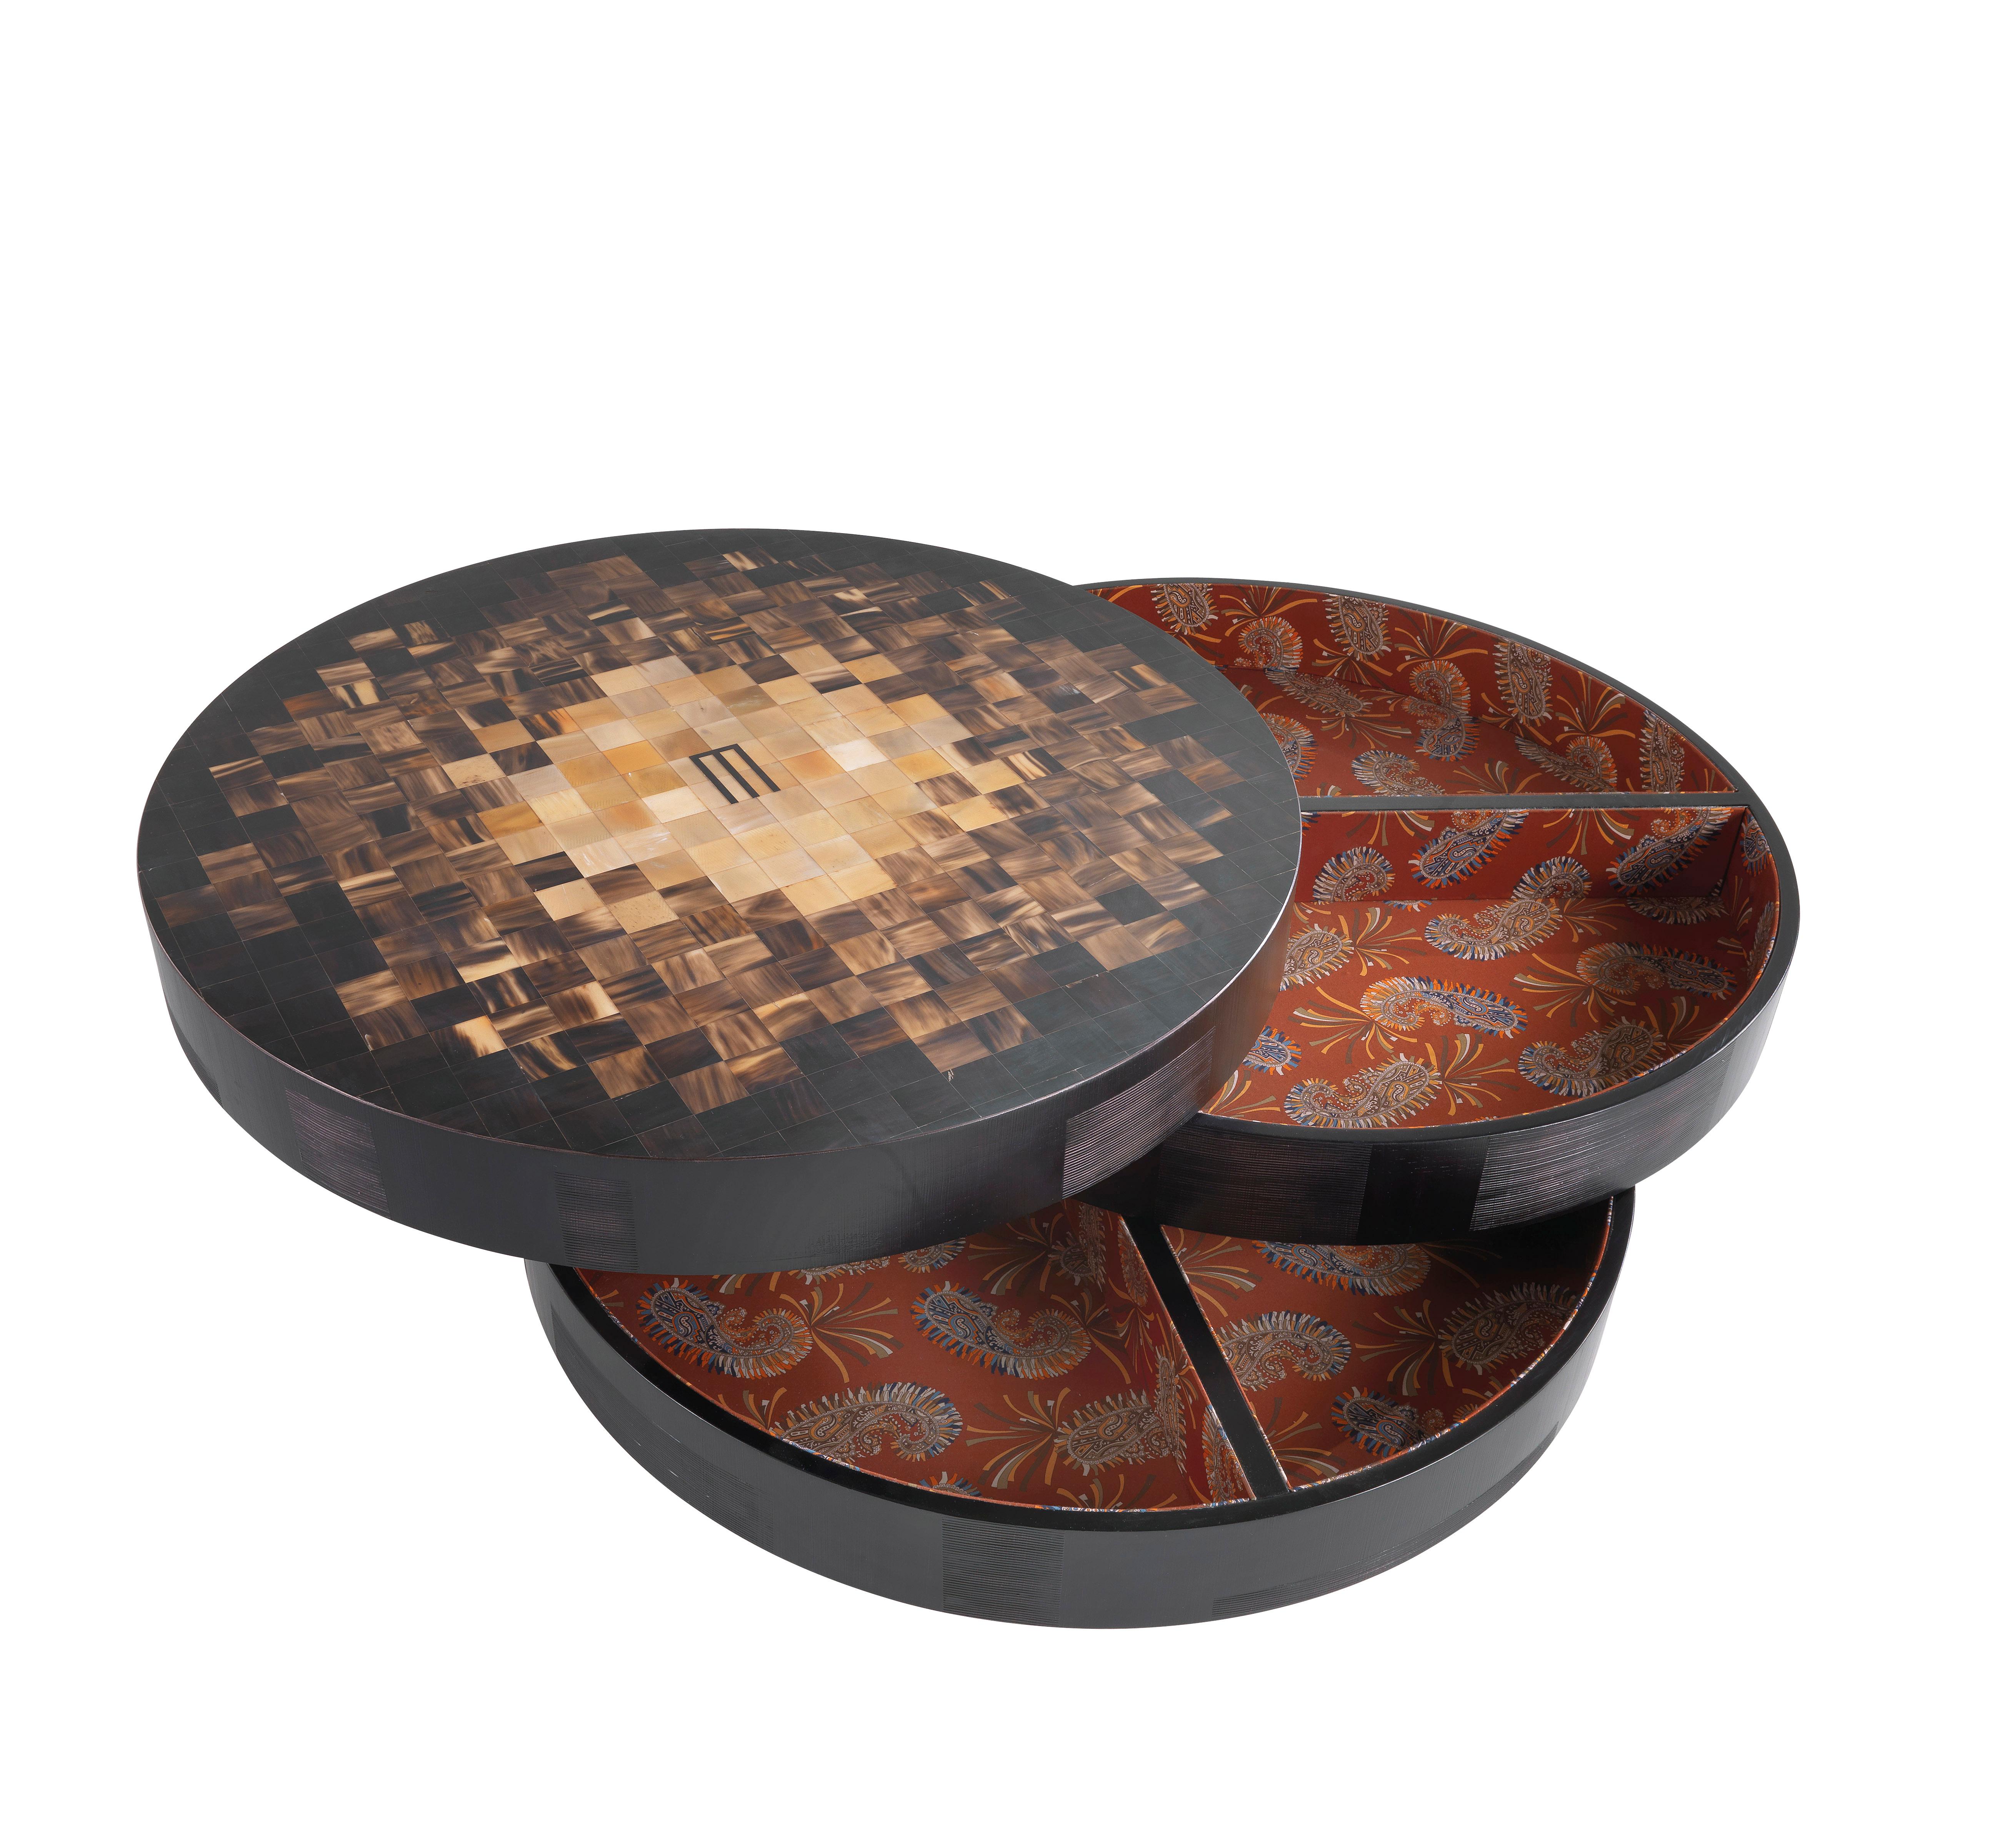 Italian 21st Century Aleppo Central Table with Ox Horn Inlay by Etro Home Interiors